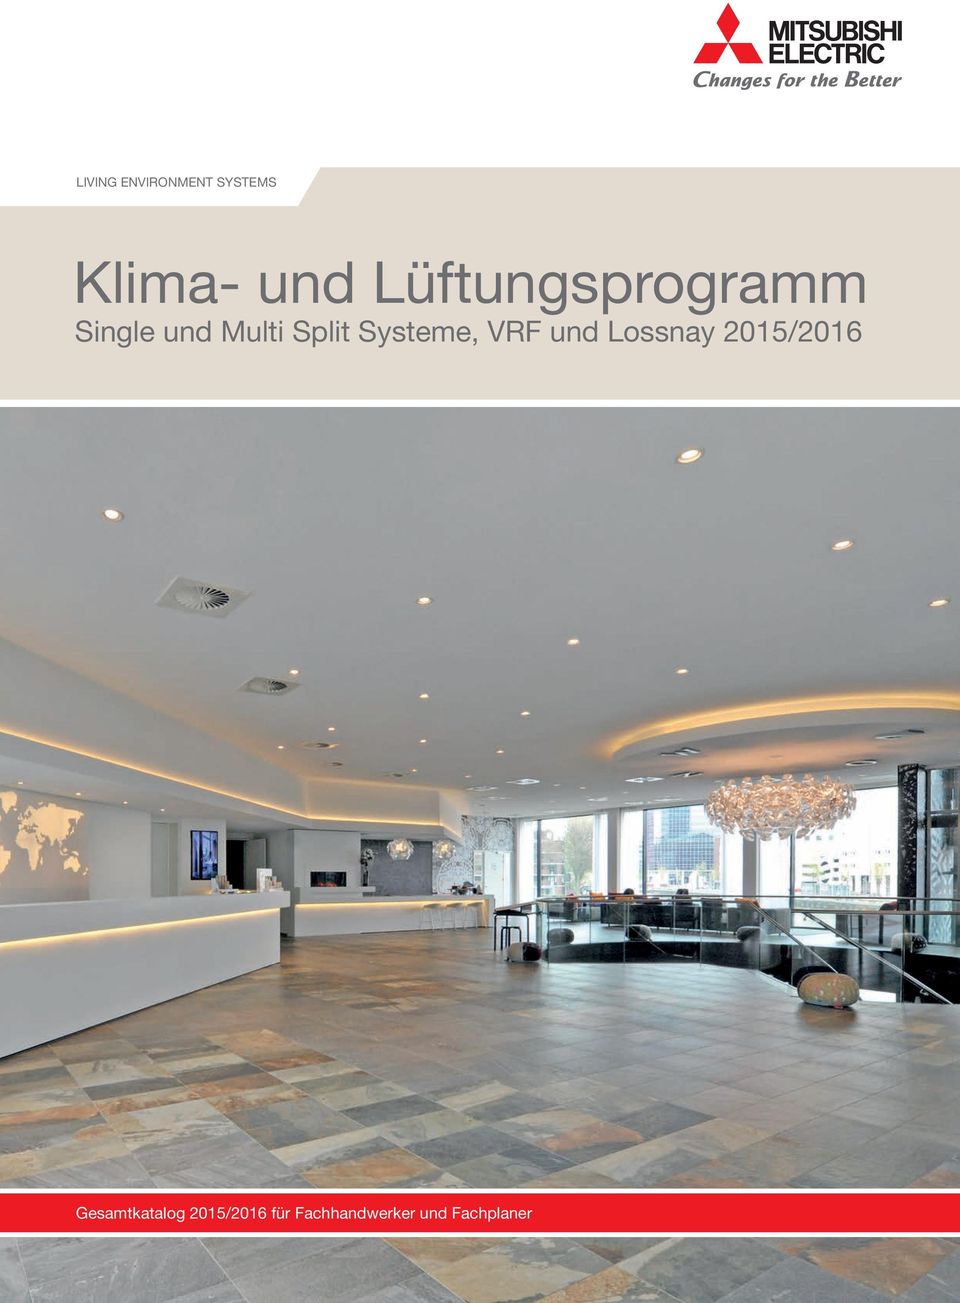 Systeme, VRF und Lossnay 2015/20